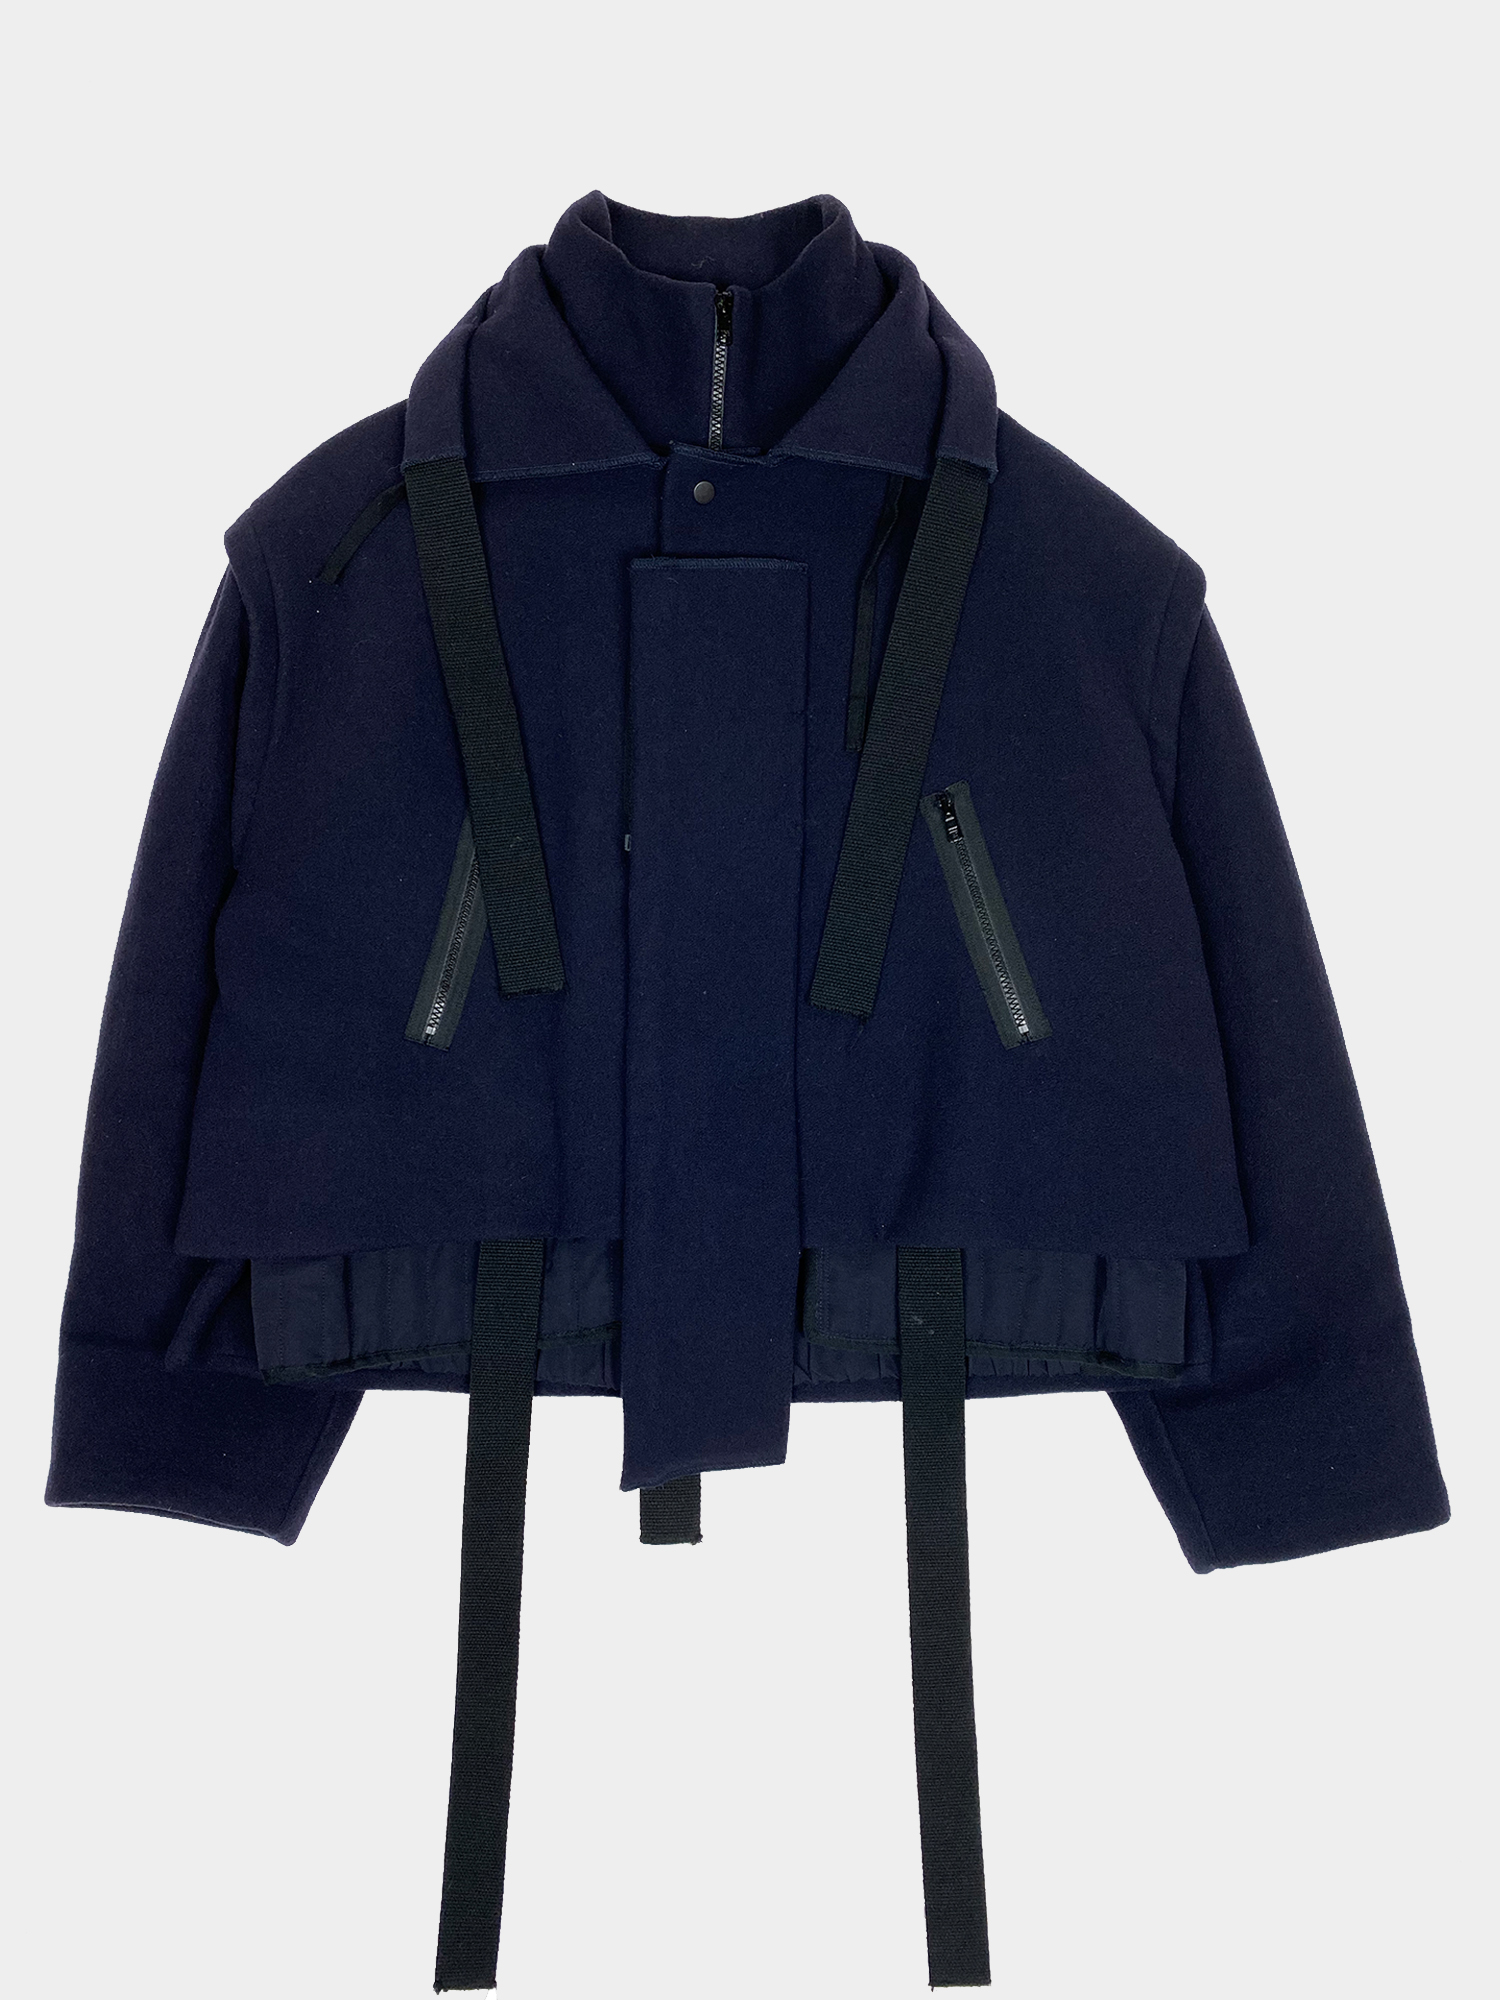 CRAIG GREEN A/W15 Wool Jacket - ARCHIVED